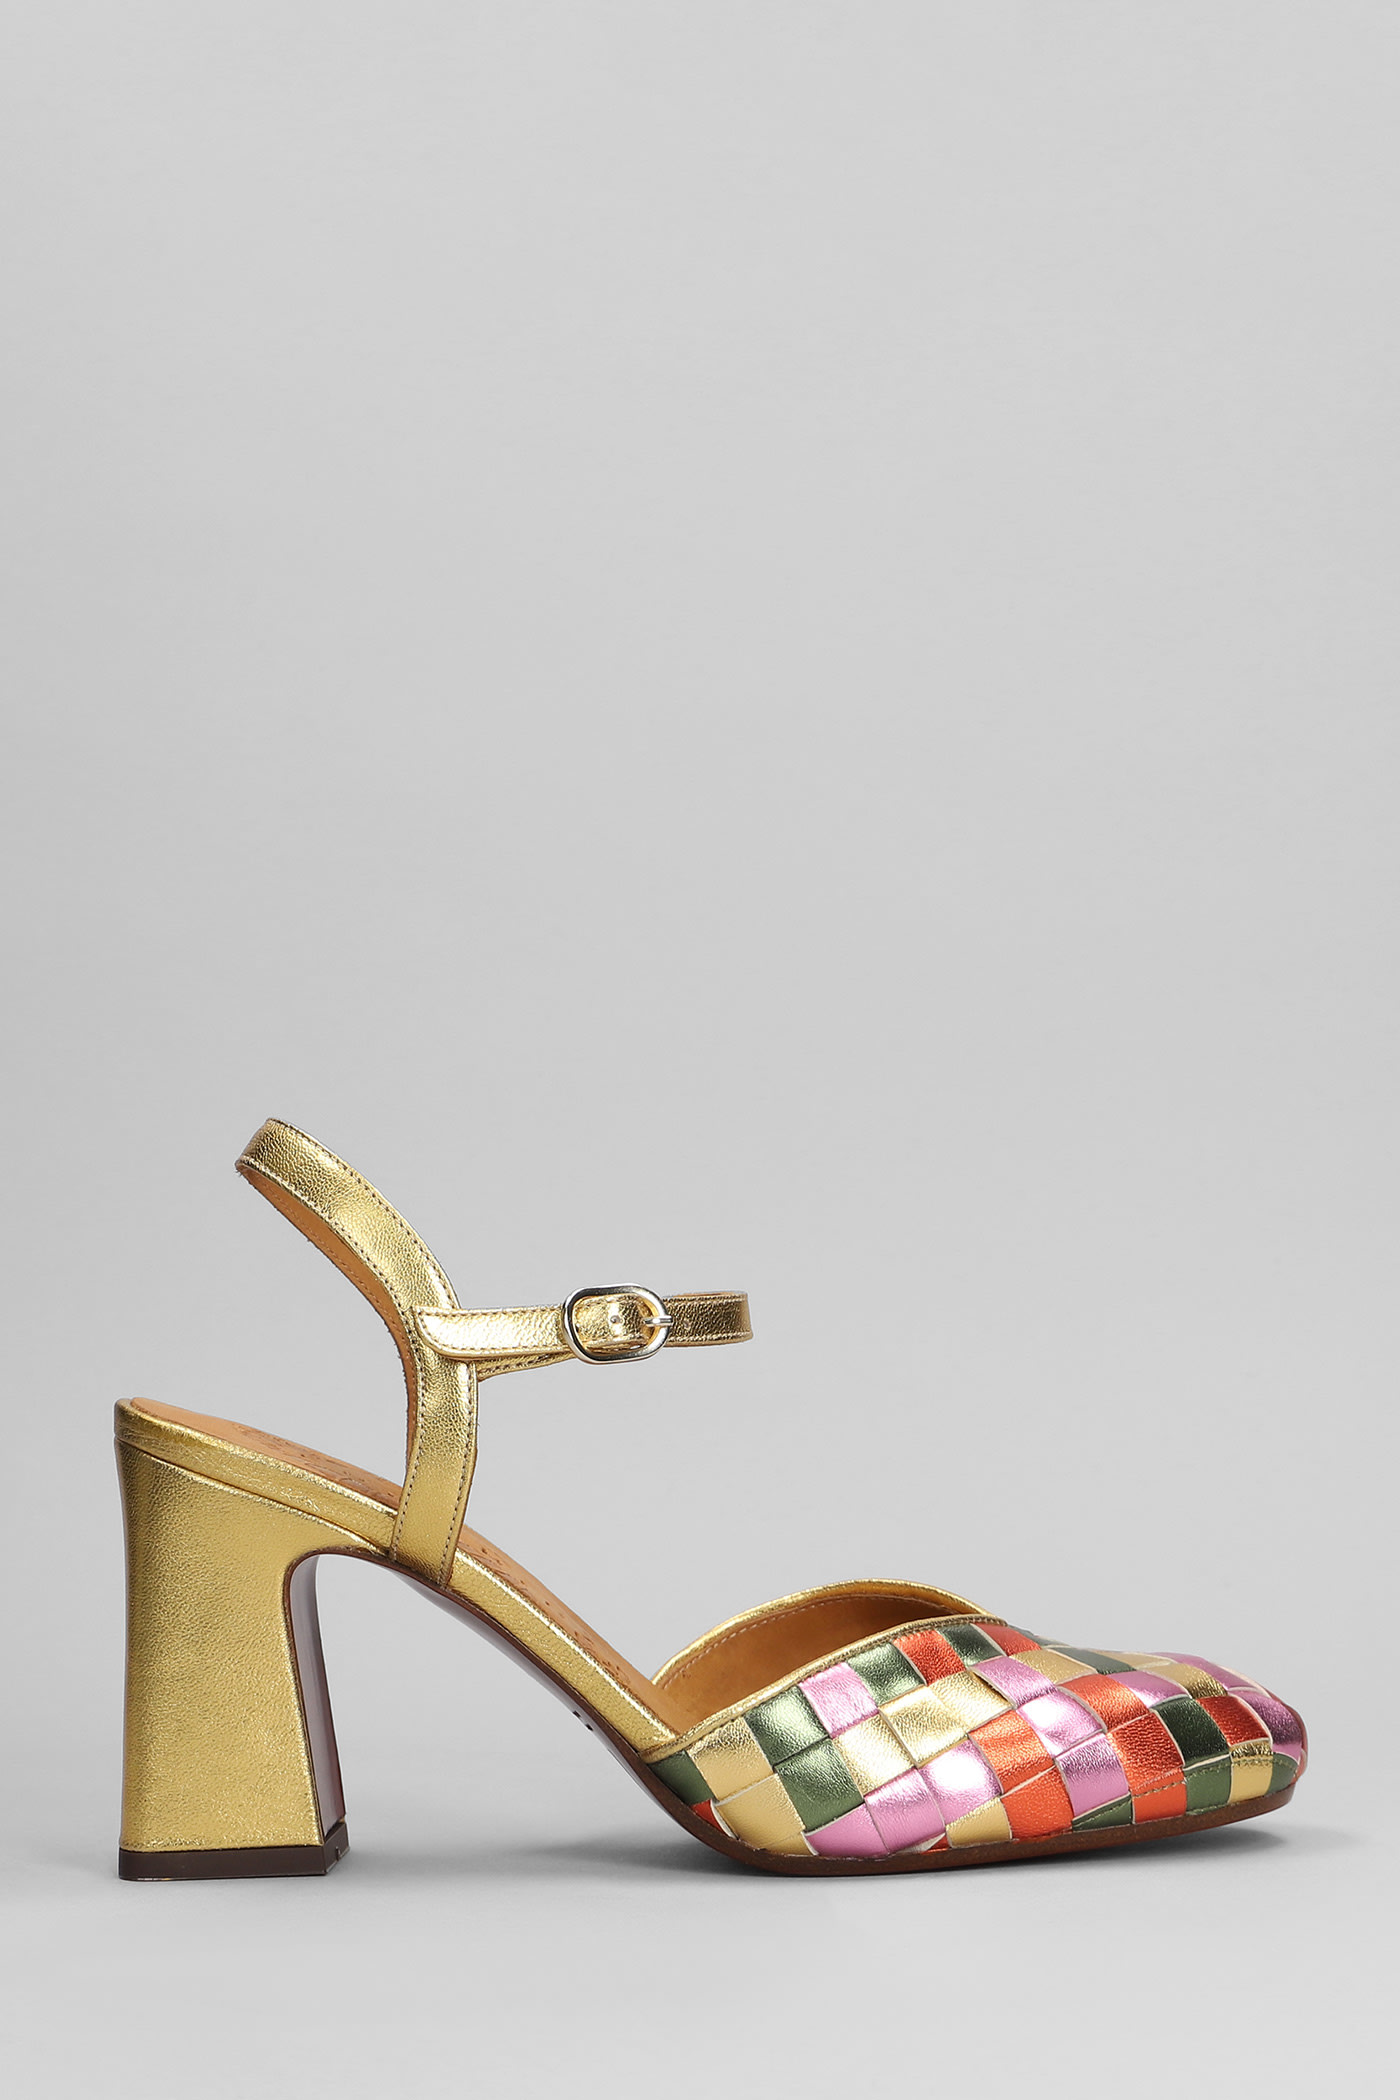 Chie Mihara Mision Sandals In Gold Leather